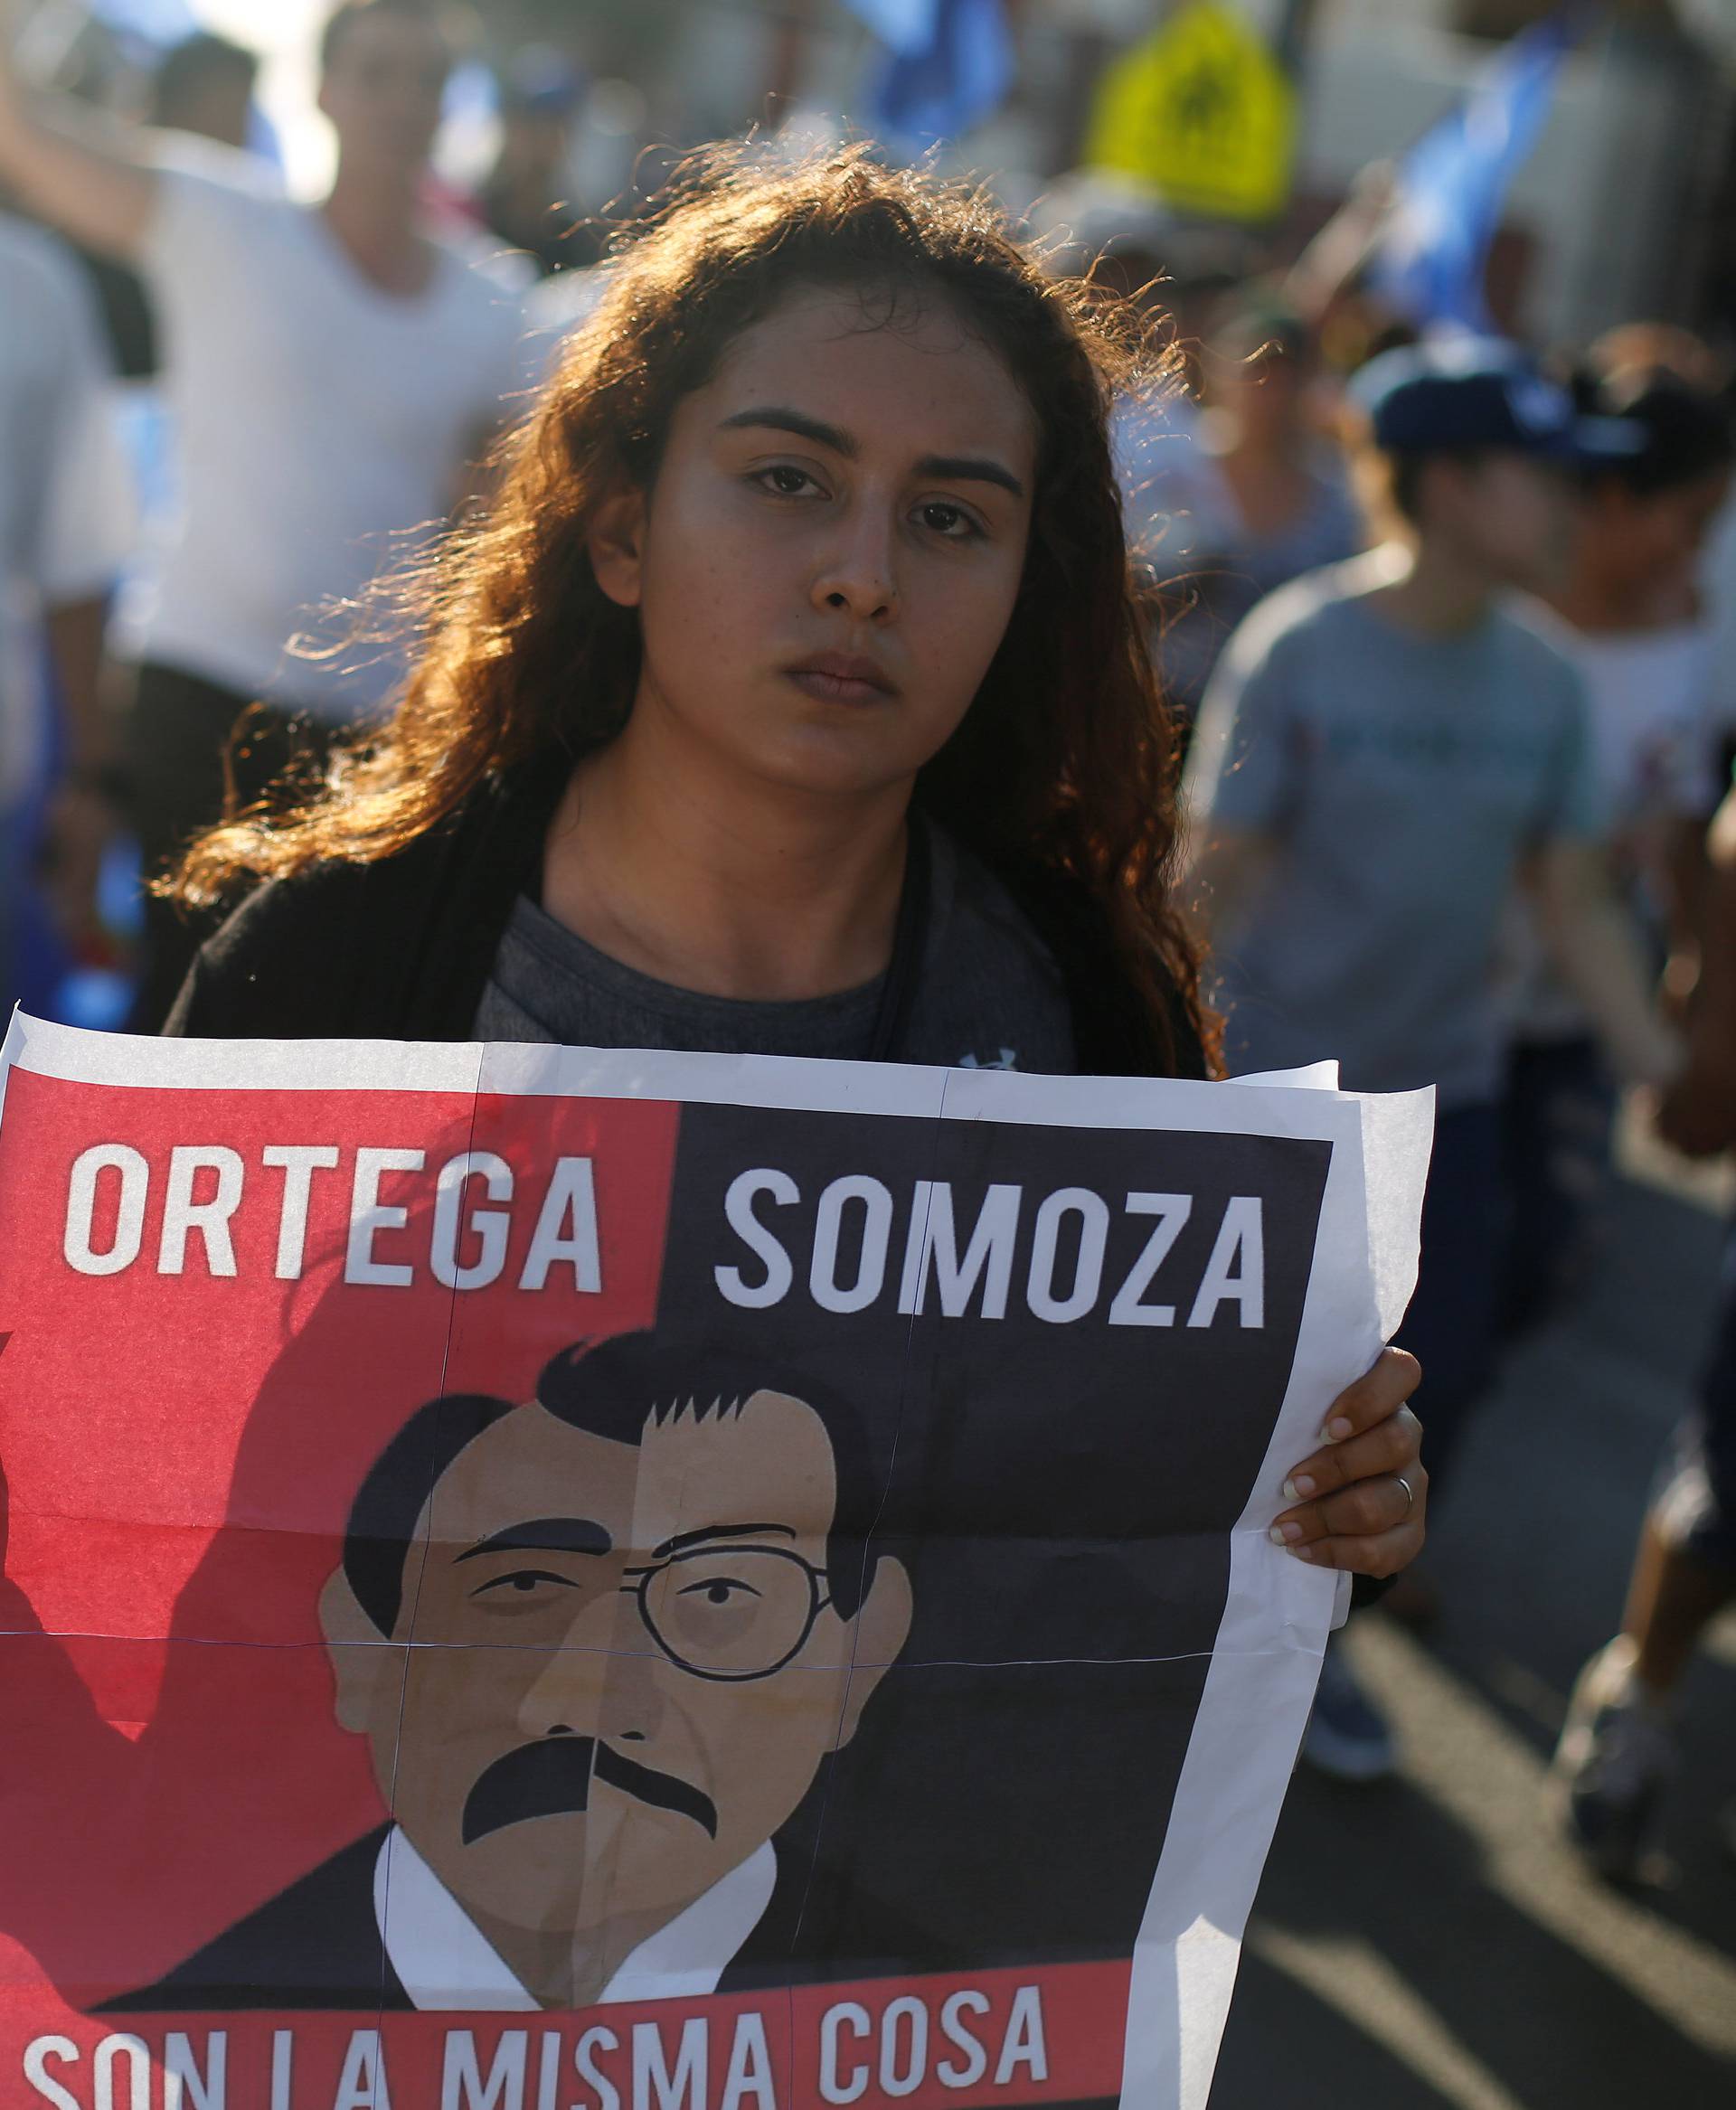 A demonstrator holds a sign showing Nicaraguan President Daniel Ortega and former President Anastasio Somoza during a protest against police violence and the government of President Ortega in Managua